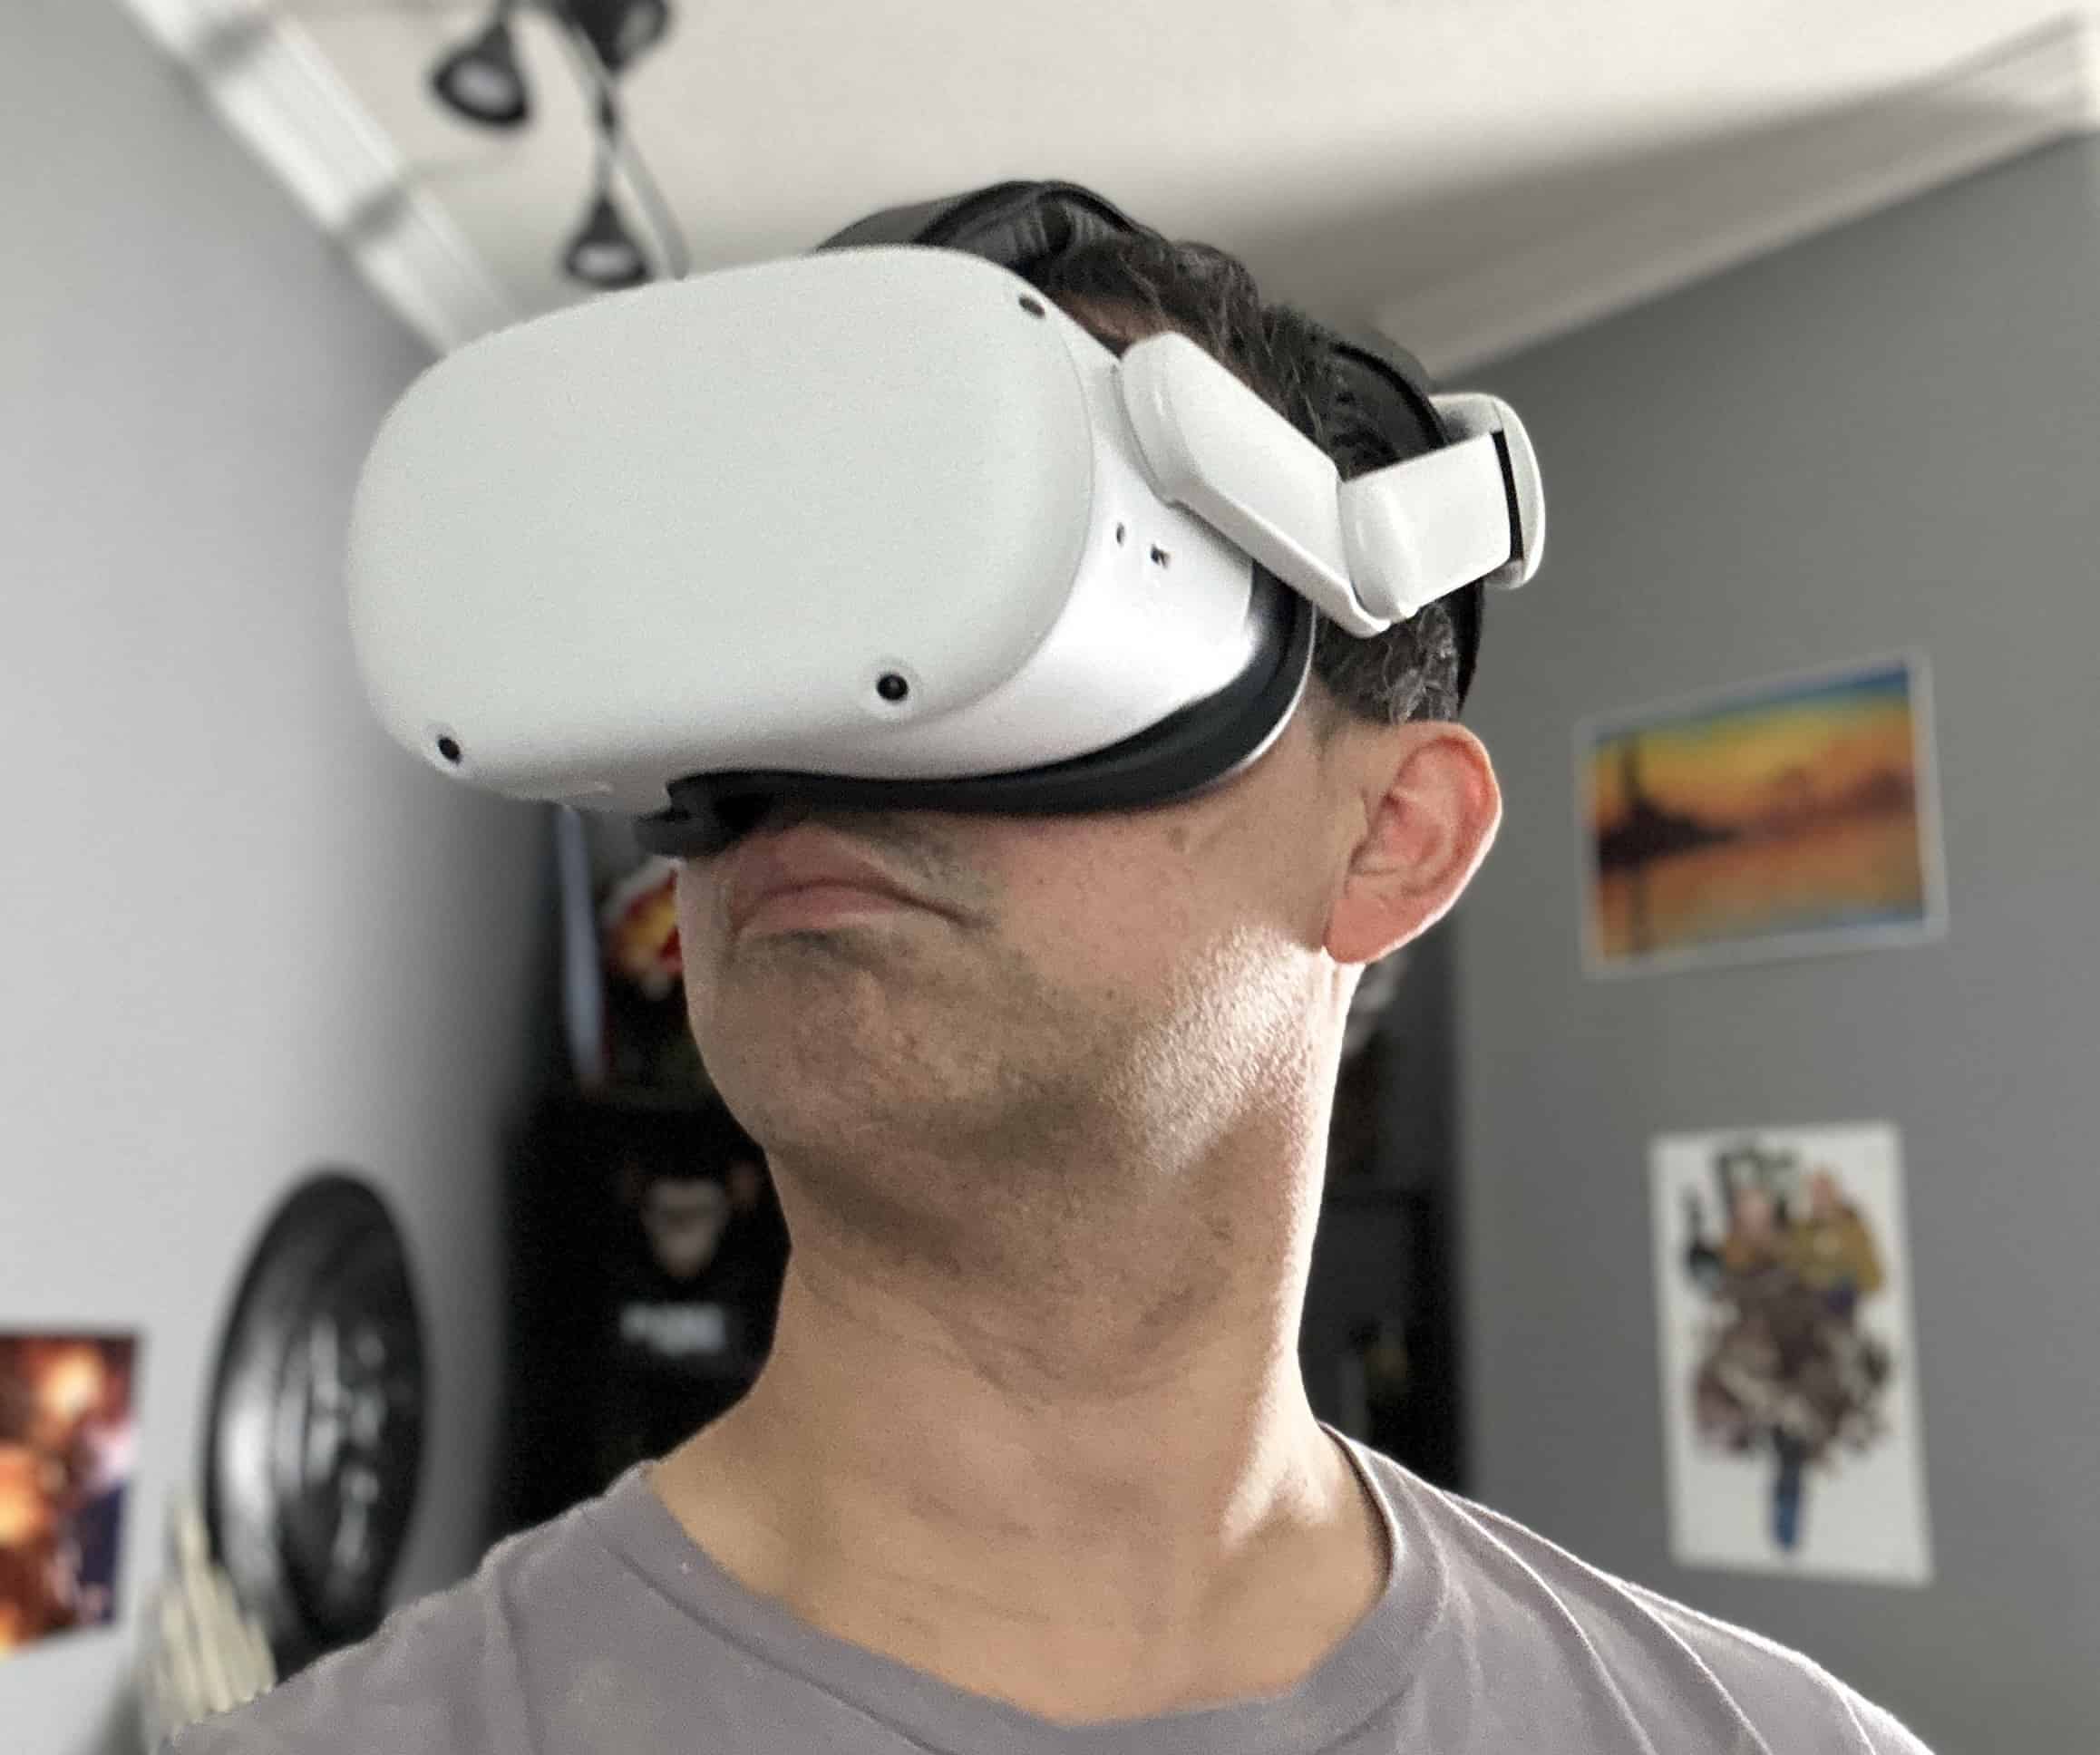 Meta Quest 2 worn on head- best for watching 360 and 3D videos